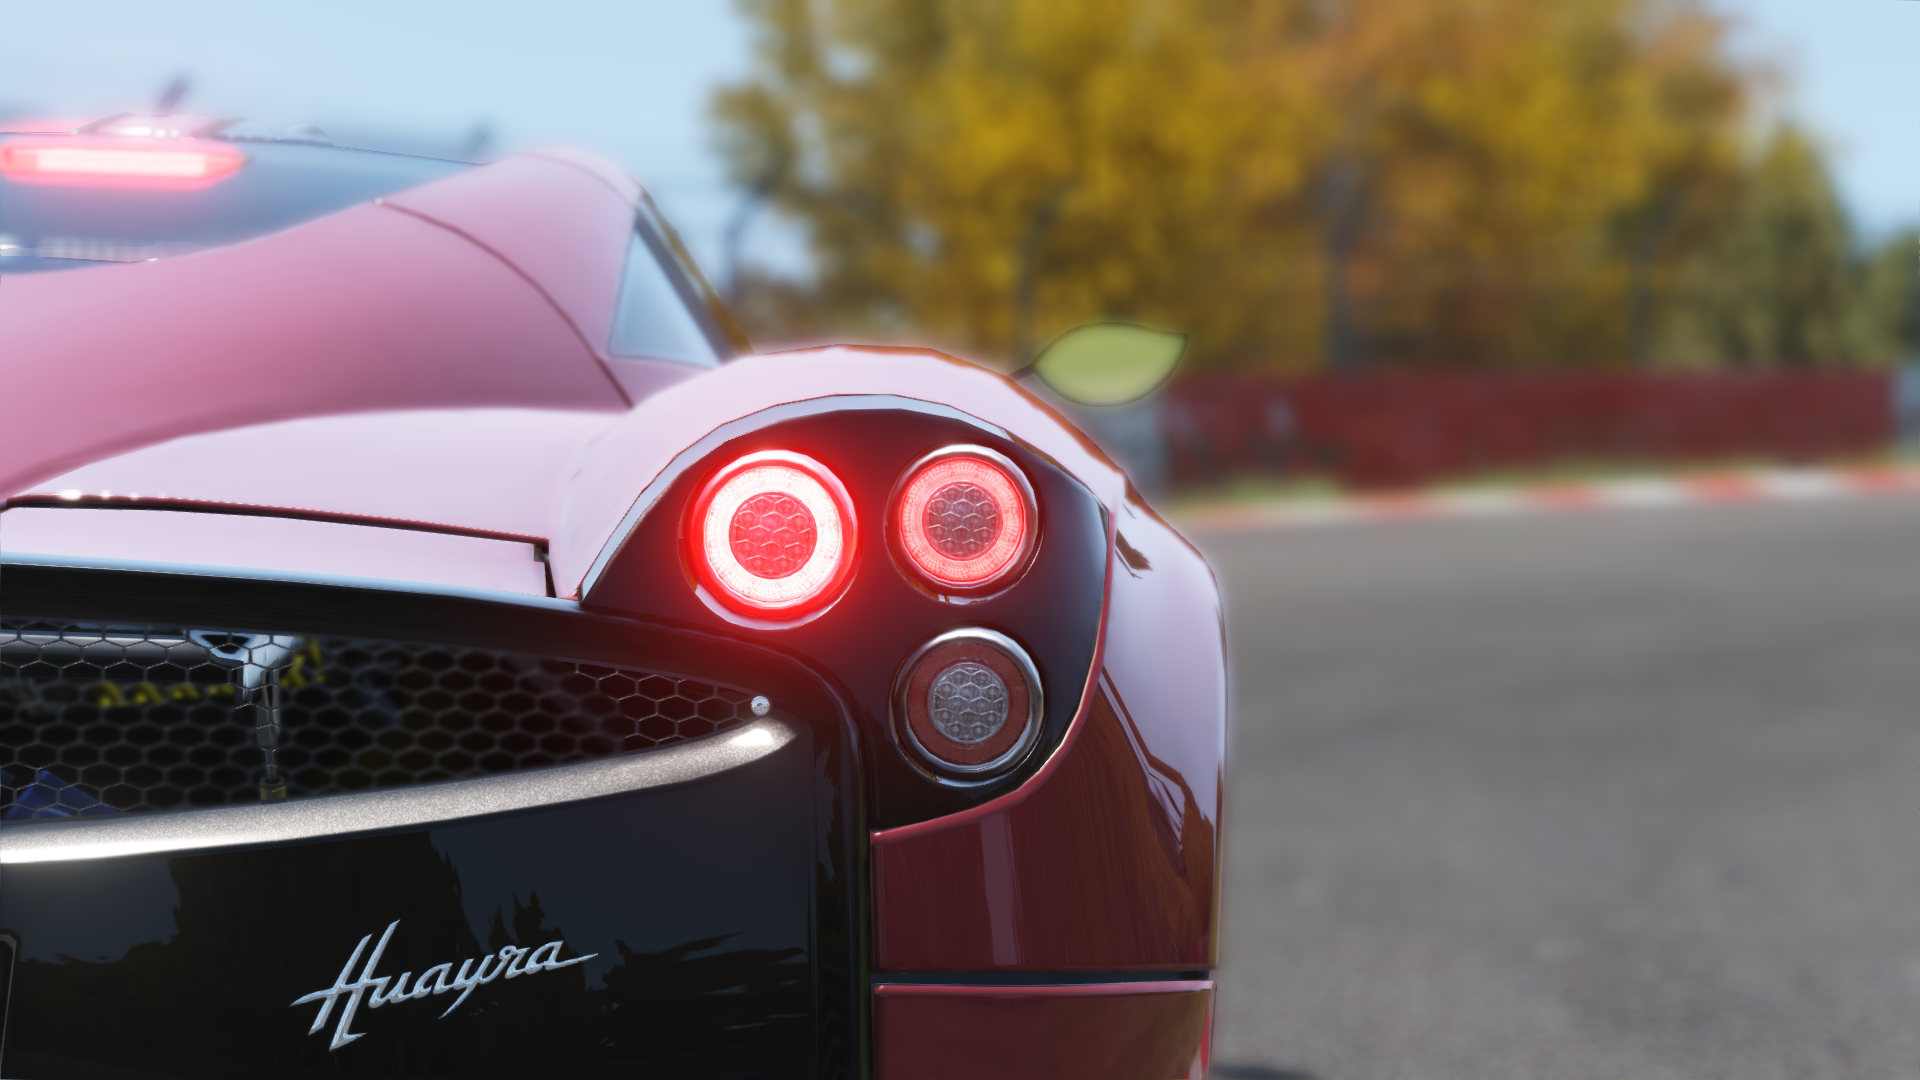 General 1920x1080 Assetto Corsa Pagani Huayra Nurburgring video games car depth of field taillights